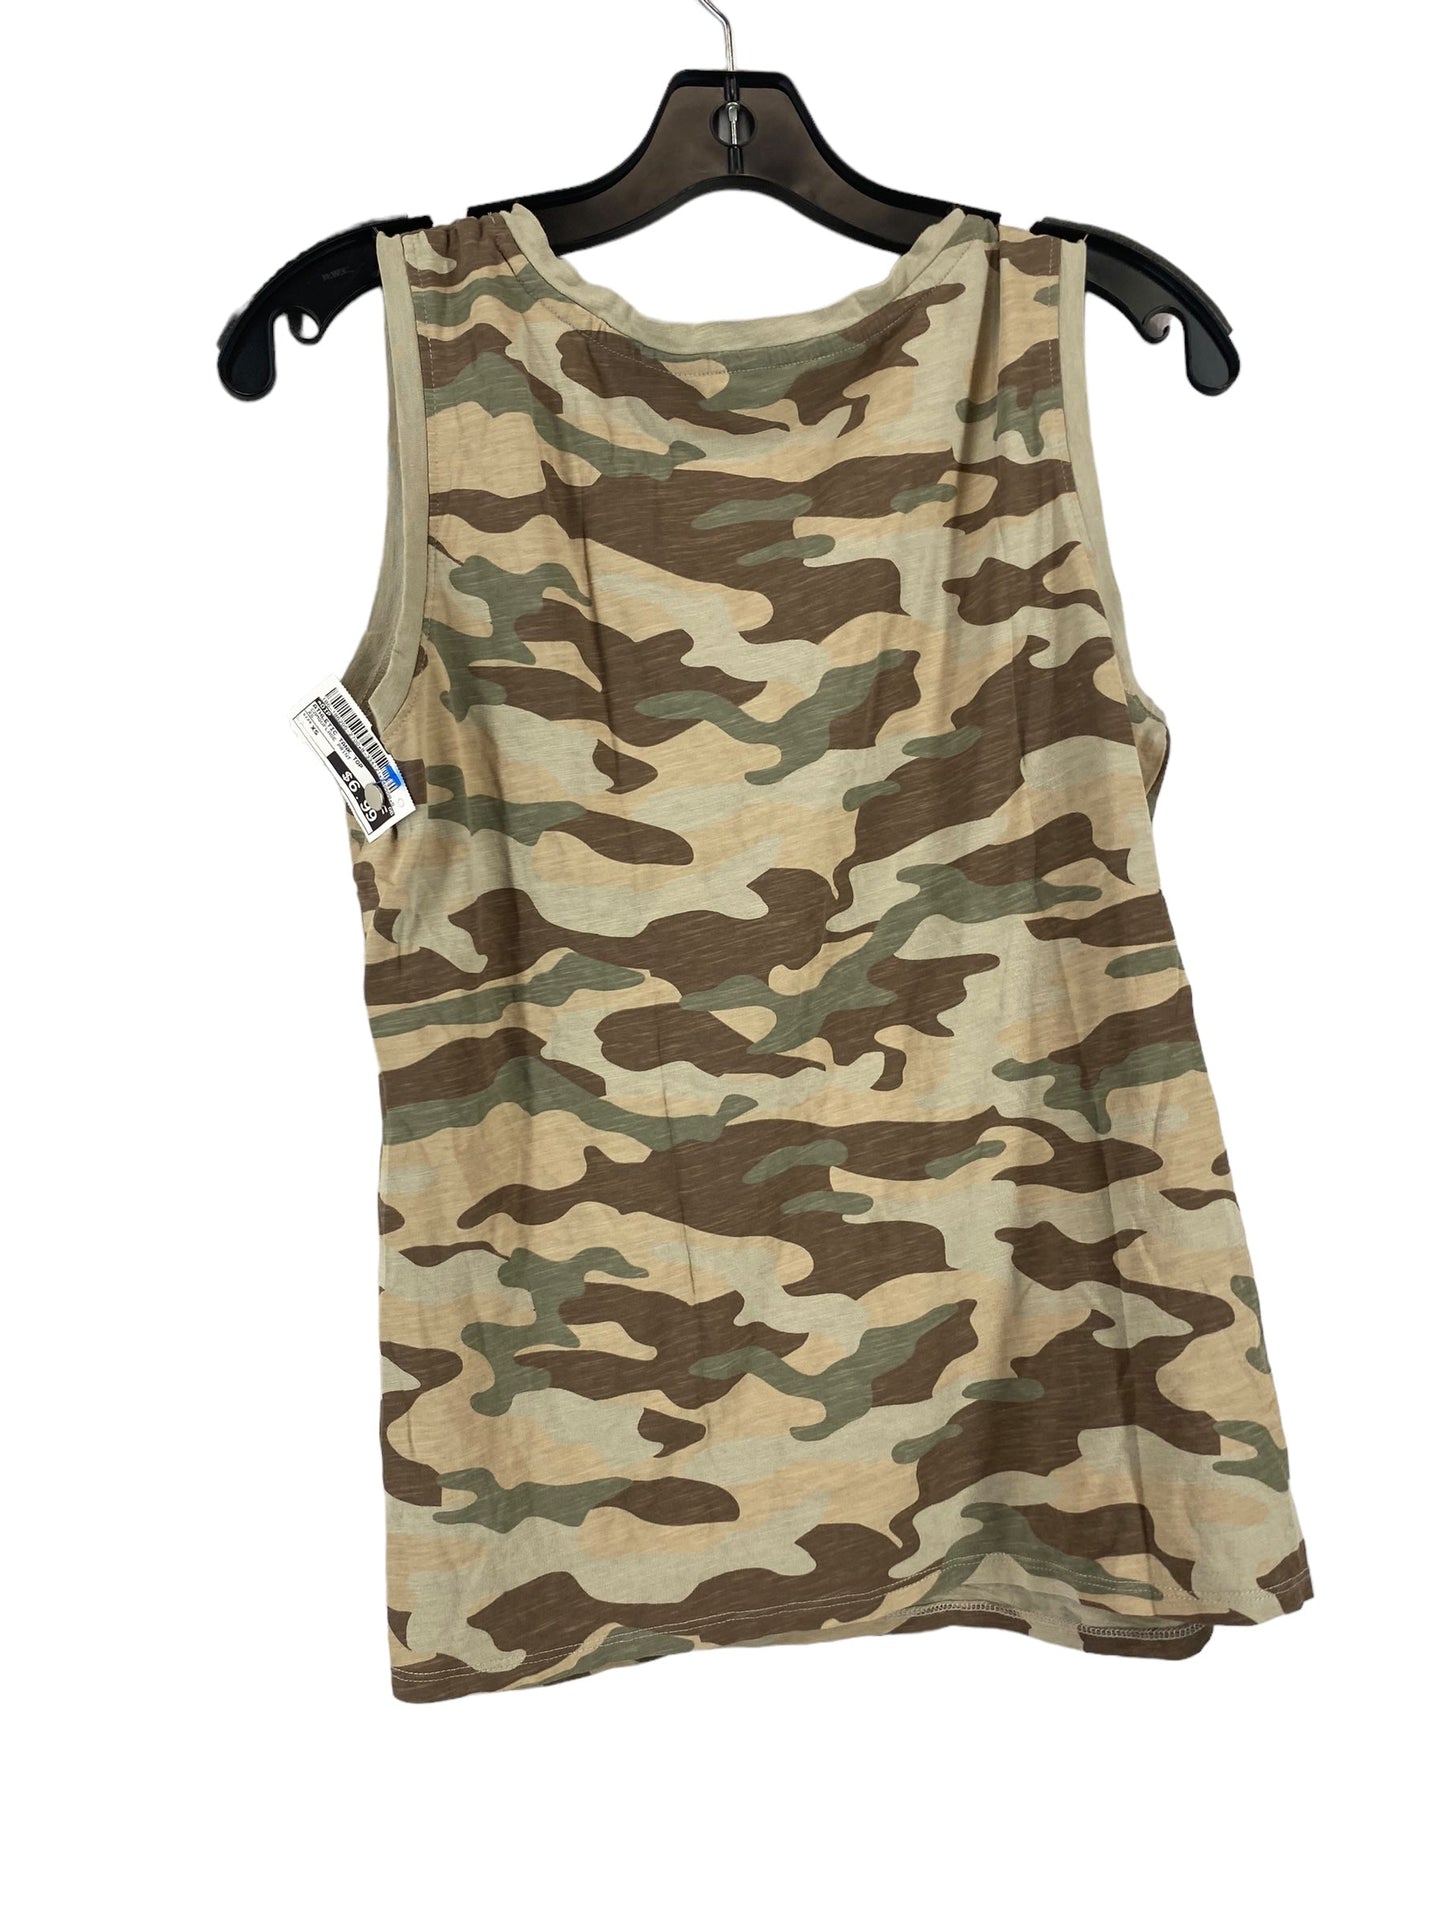 Camouflage Print Athletic Tank Top Dip, Size Xs